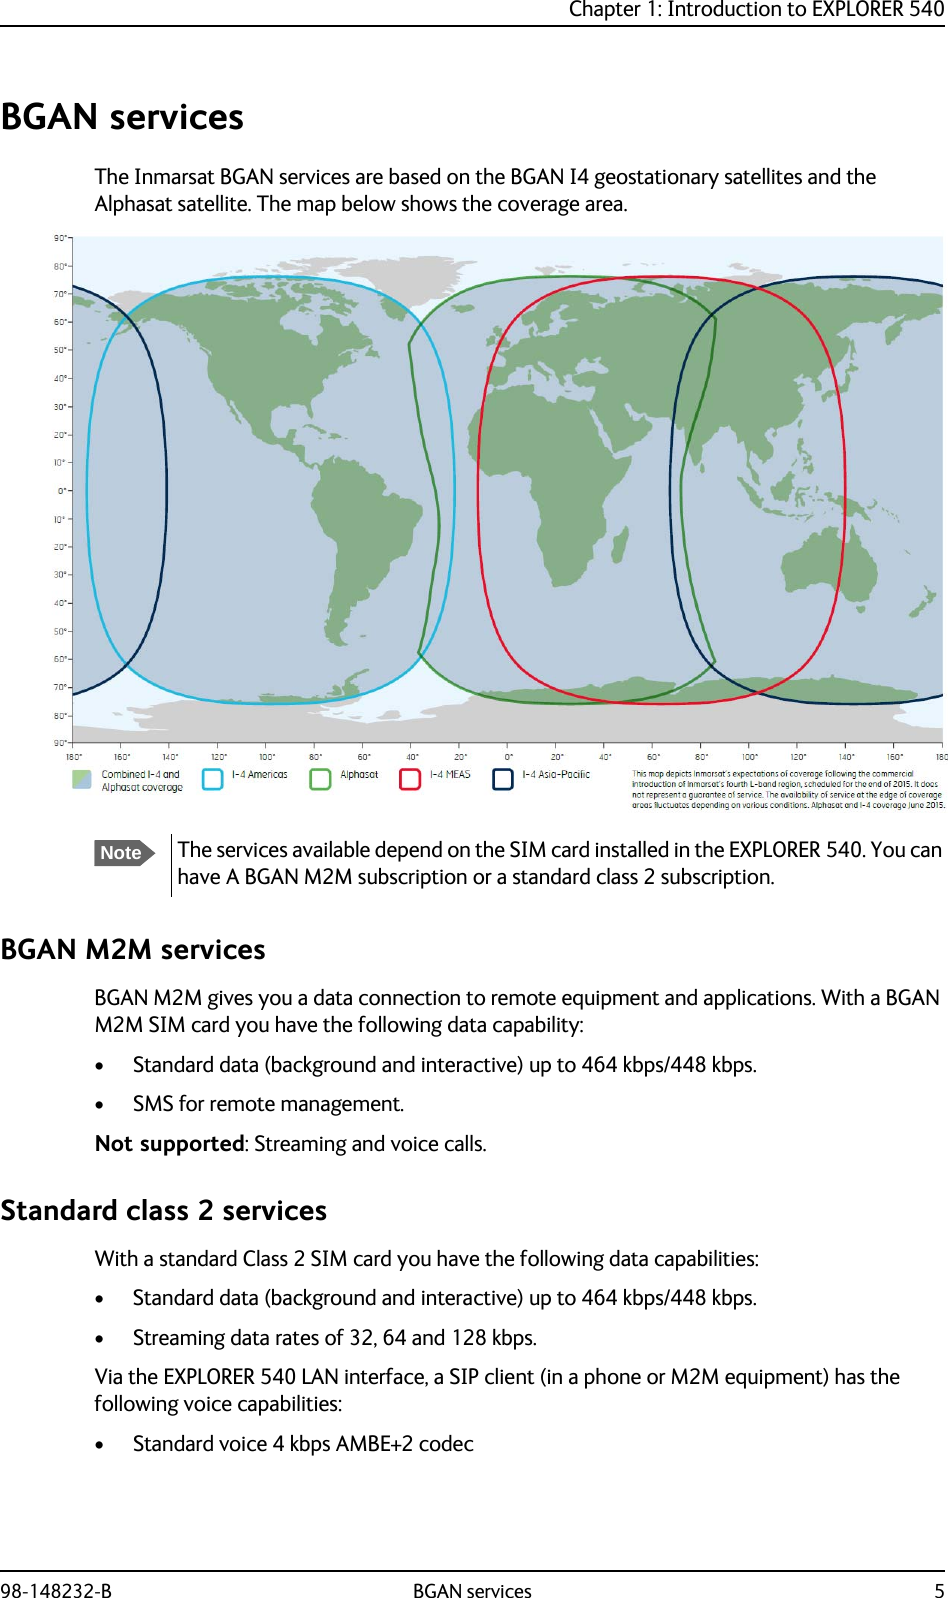 Chapter 1: Introduction to EXPLORER 54098-148232-B BGAN services 5BGAN servicesThe Inmarsat BGAN services are based on the BGAN I4 geostationary satellites and the Alphasat satellite. The map below shows the coverage area.BGAN M2M servicesBGAN M2M gives you a data connection to remote equipment and applications. With a BGAN M2M SIM card you have the following data capability:• Standard data (background and interactive) up to 464 kbps/448 kbps.• SMS for remote management.Not supported: Streaming and voice calls.Standard class 2 servicesWith a standard Class 2 SIM card you have the following data capabilities:• Standard data (background and interactive) up to 464 kbps/448 kbps.• Streaming data rates of 32, 64 and 128 kbps.Via the EXPLORER 540 LAN interface, a SIP client (in a phone or M2M equipment) has the following voice capabilities:• Standard voice 4 kbps AMBE+2 codecNoteThe services available depend on the SIM card installed in the EXPLORER 540. You can have A BGAN M2M subscription or a standard class 2 subscription.